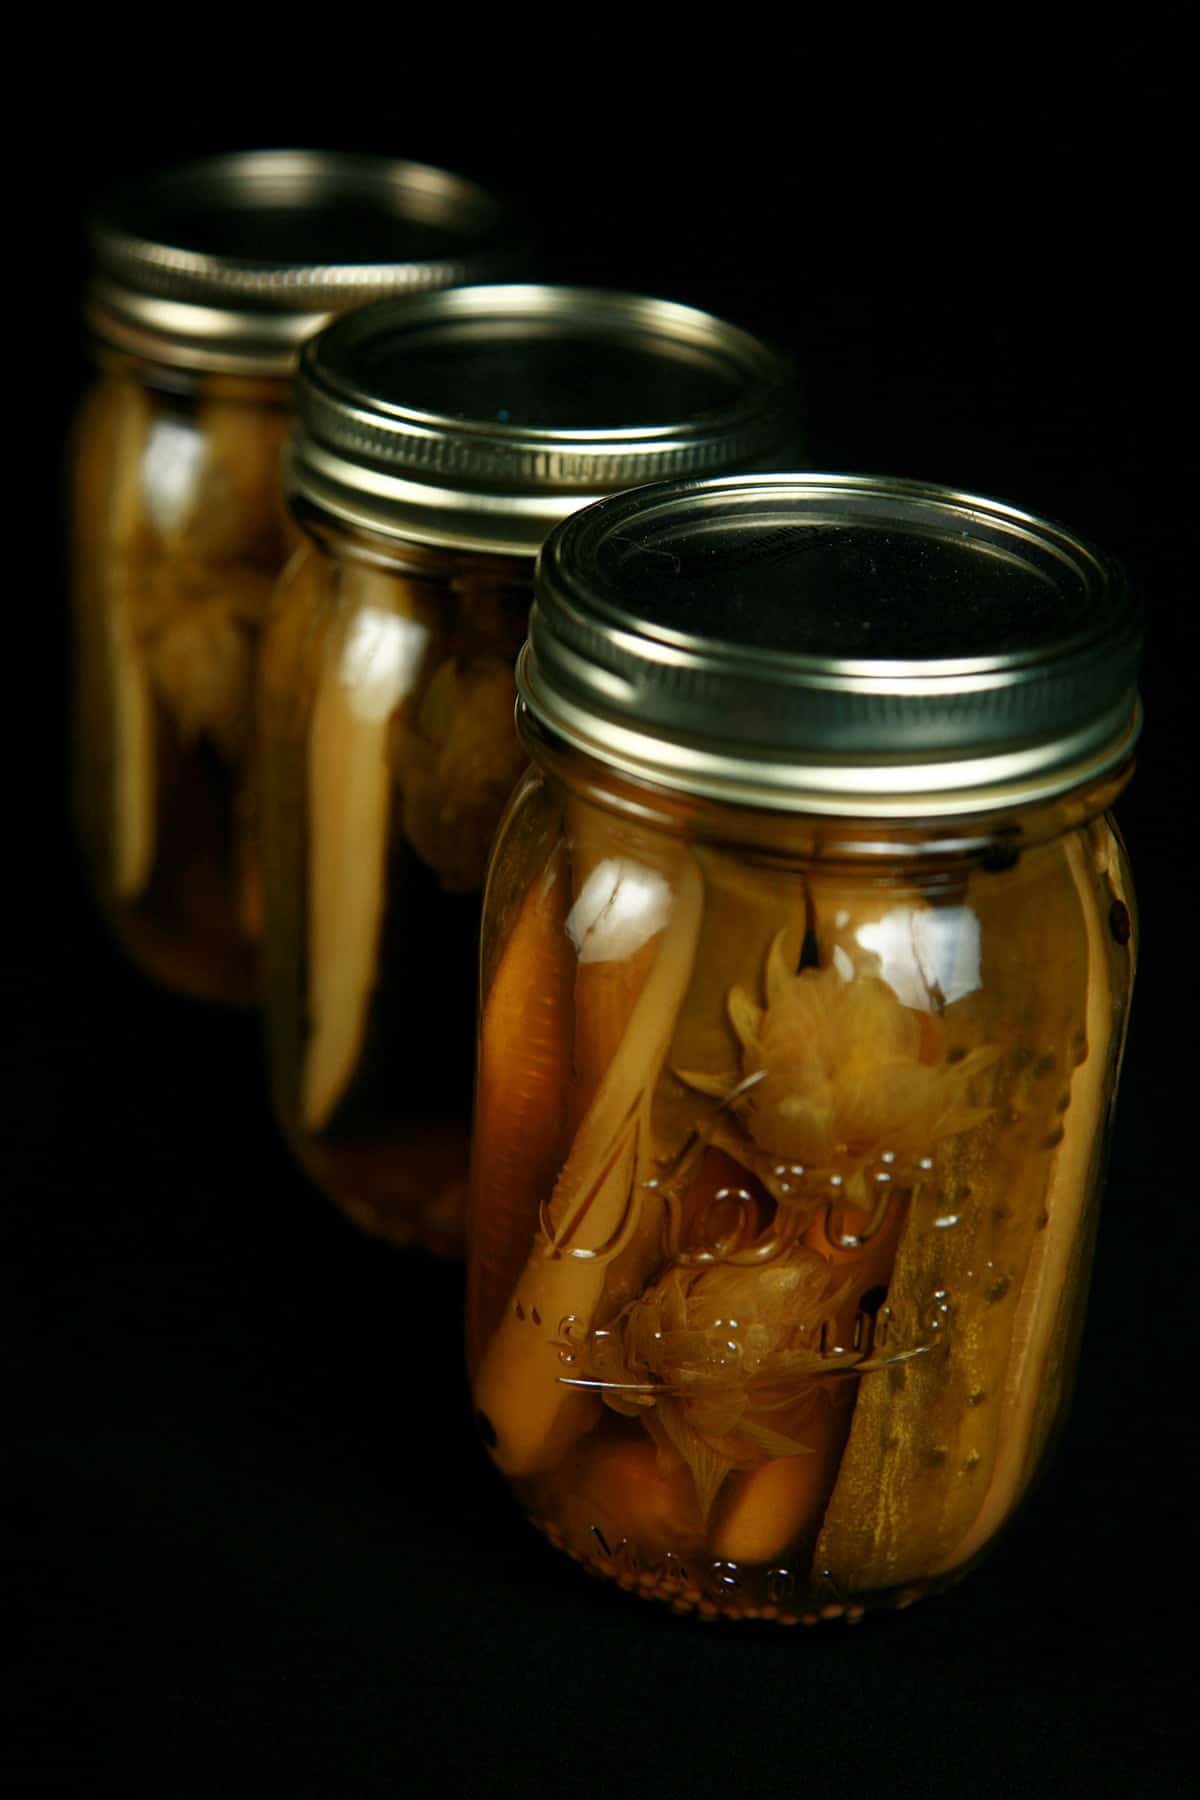 3 jars of hoppy IPA pickles in a row, Hop flowers are visible in the jars, which are against a black background.